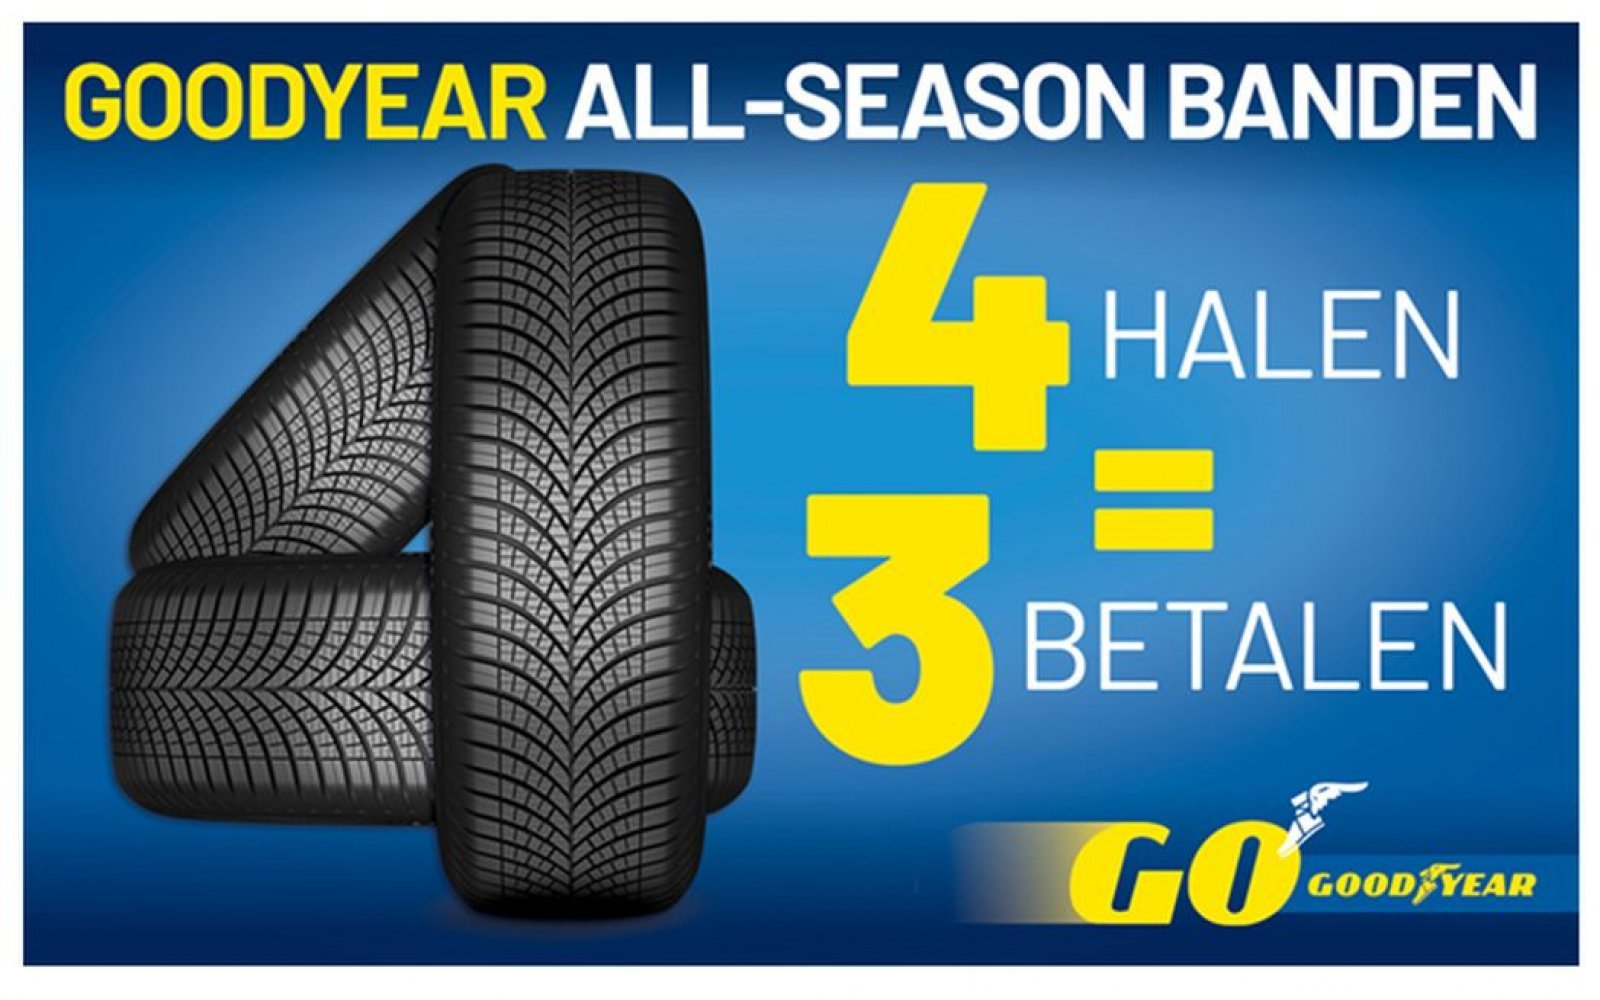 What do all-season tires cost and what do you save by buying all-season tires?